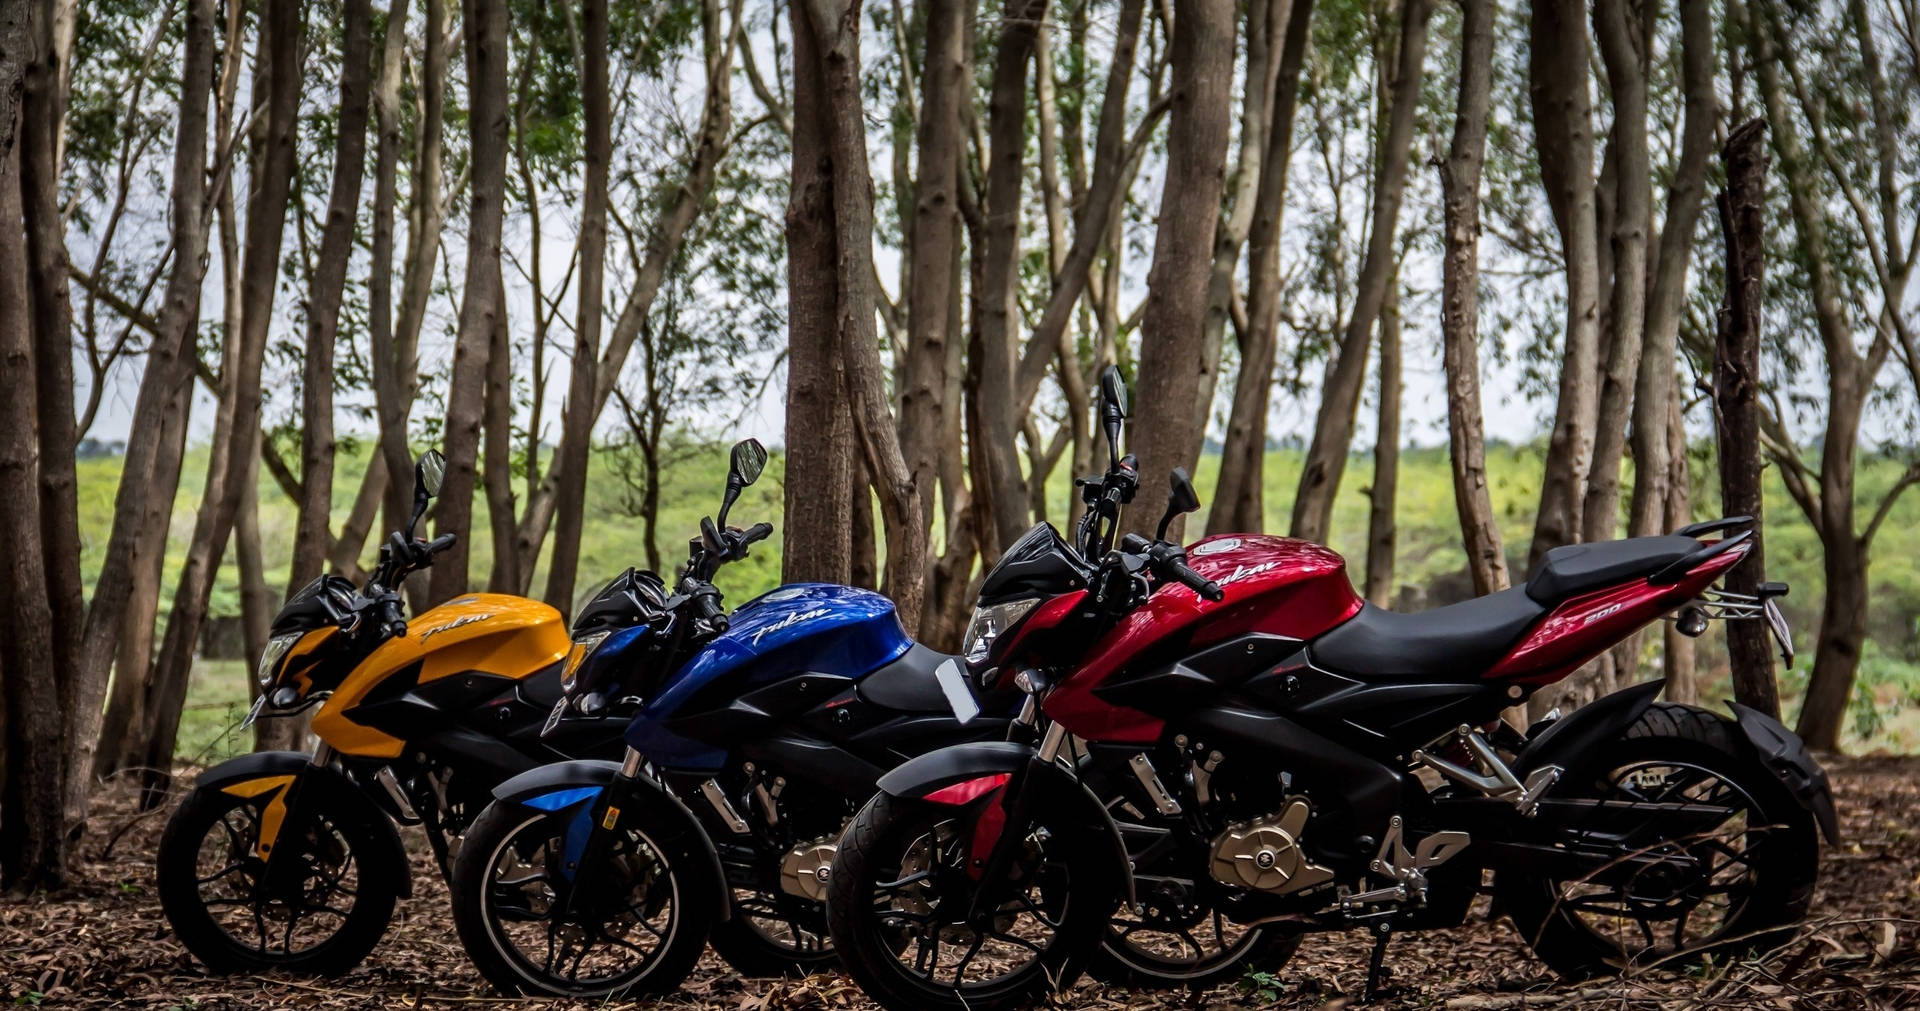 Ns 200 Motorcycles In Forest Background